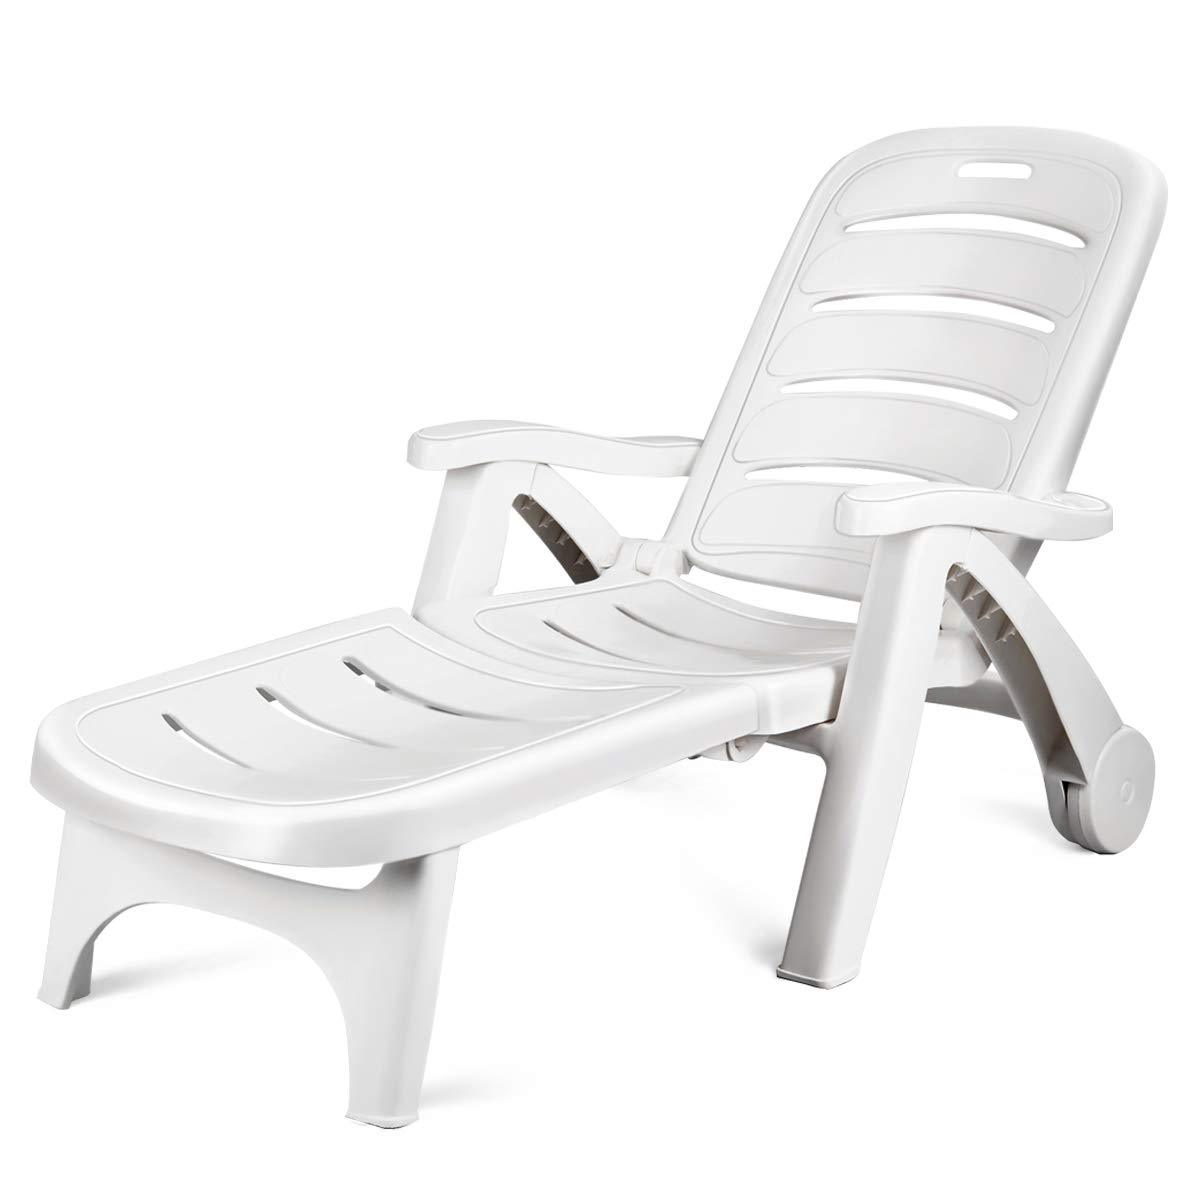  Patio Chaise Lounge Recliner on Wheels - Giantex